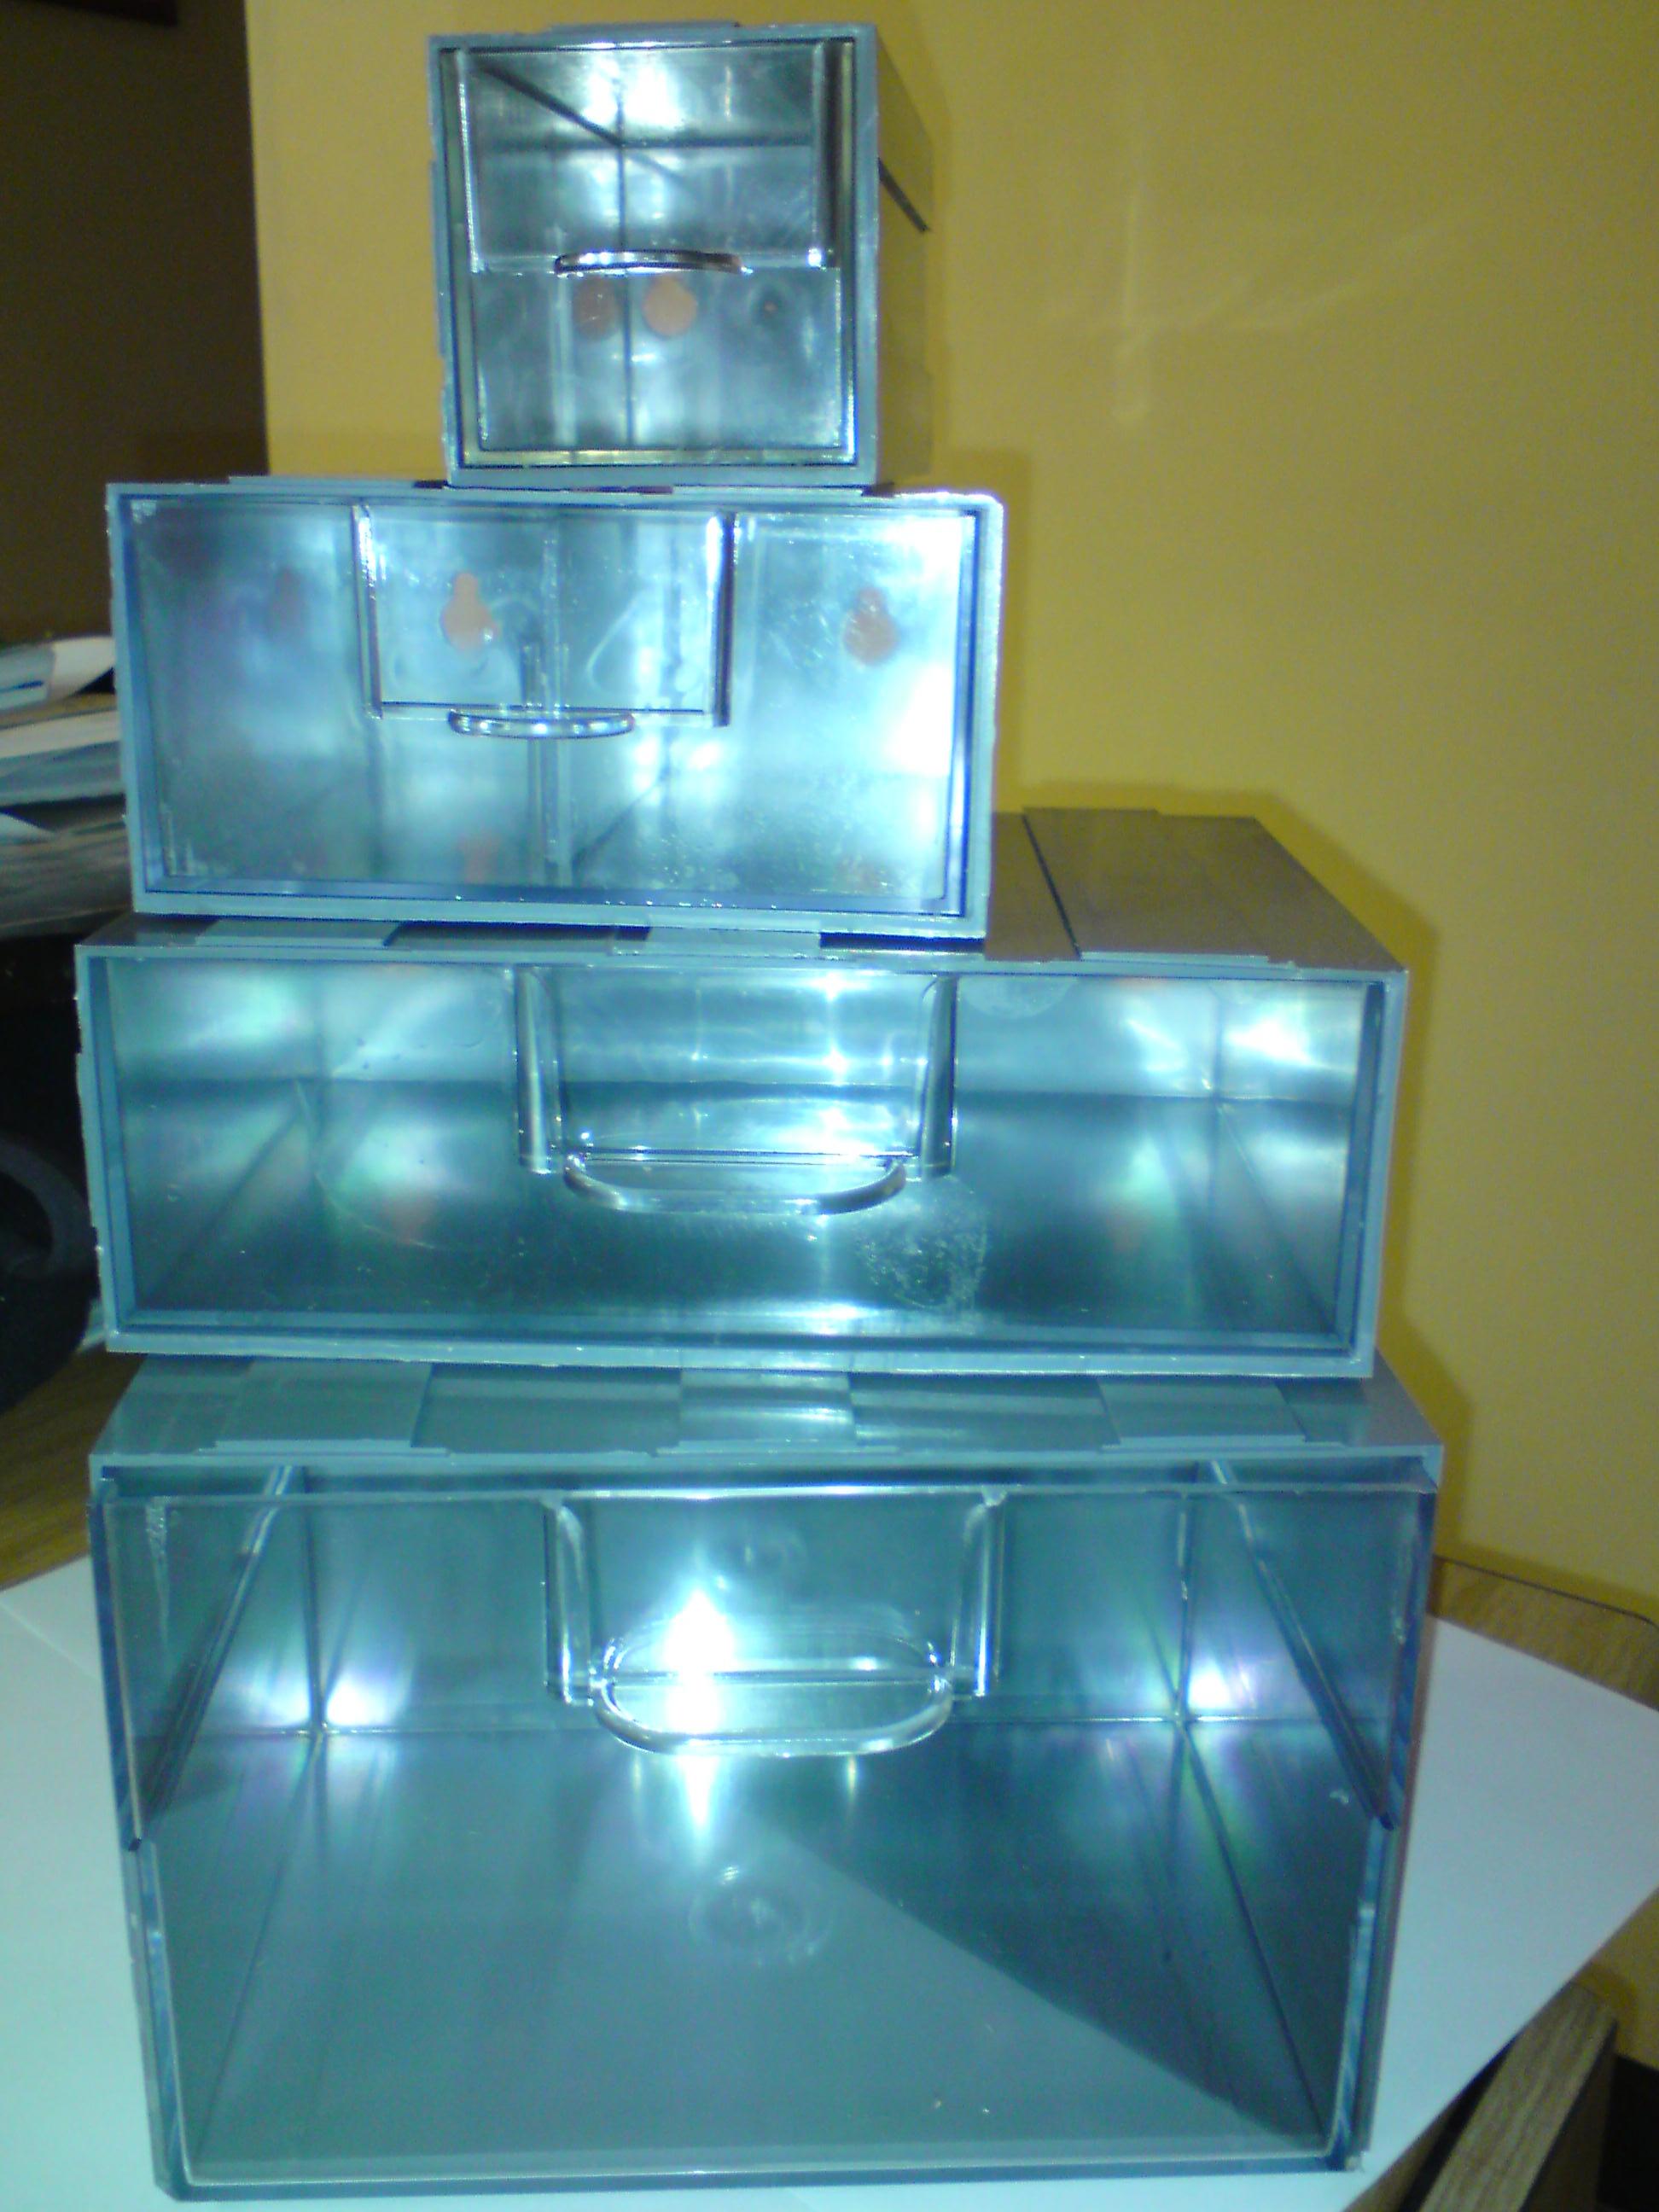 Inter-stack boxes